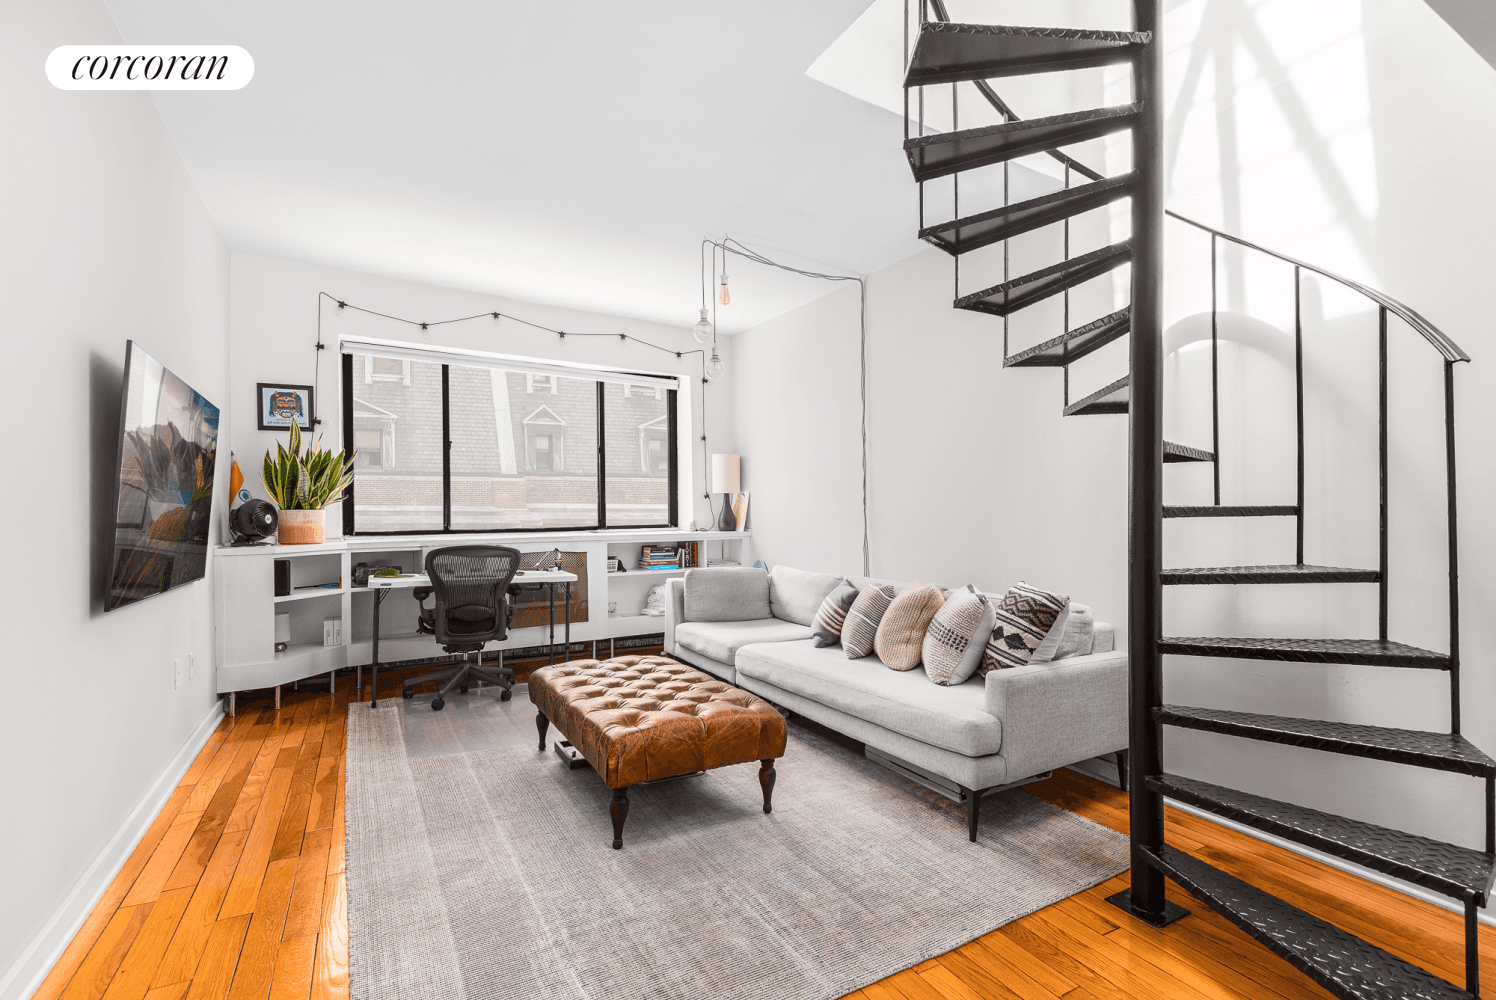 Investor friendly subletting allowed, this unique 1 bed 1 bath duplex with soaring ceilings is cloaked in natural light.